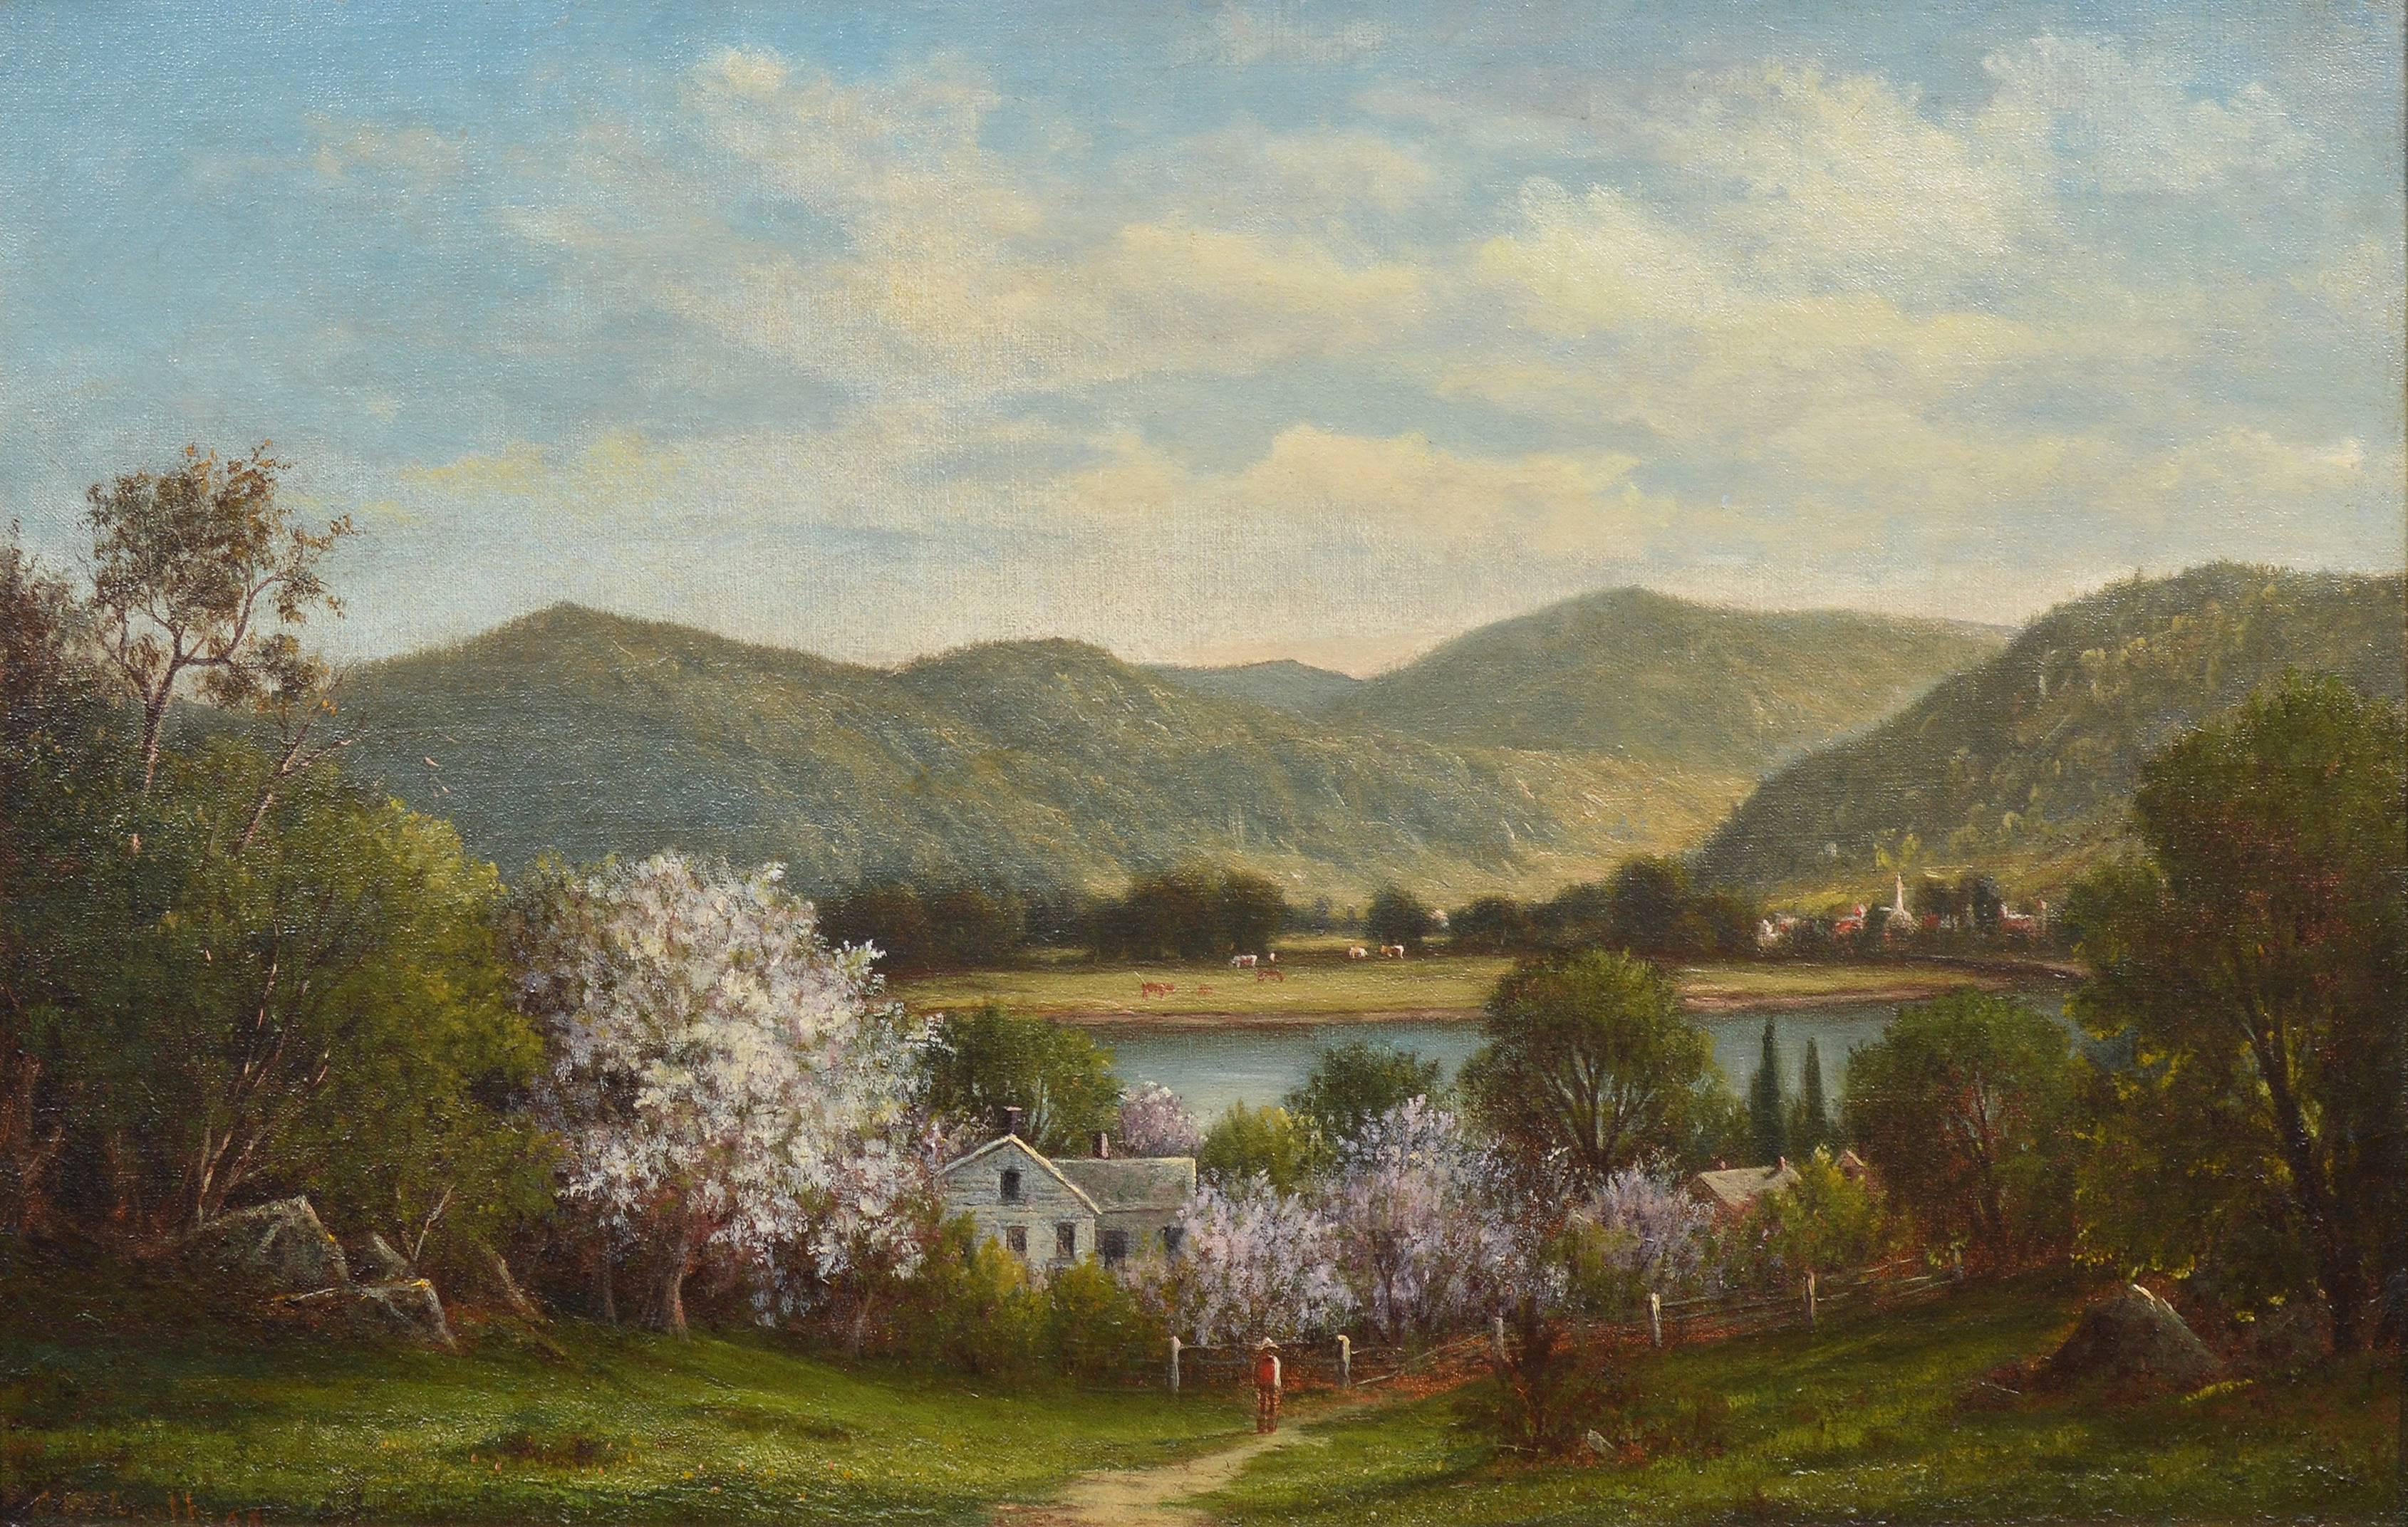 Cherry Blossoms in the Hudson River Valley - Painting by Charles Wilson Knapp